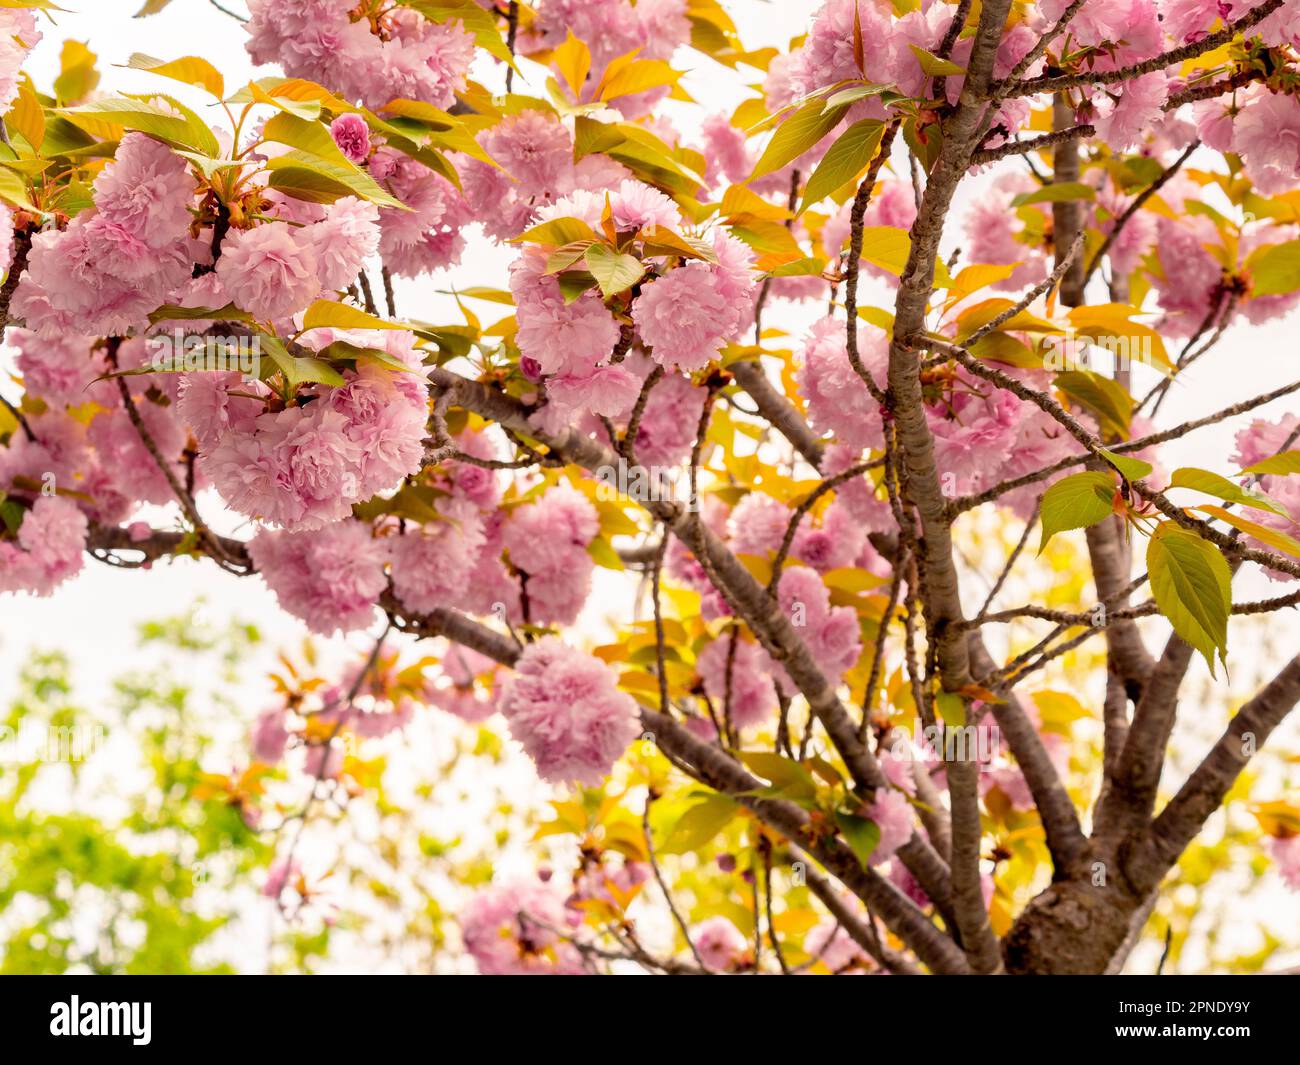 selective focus of a Prunus serrulata 'Kanzan' (Japanese Flowering Cherry) with pink flowers in spring with blurred background Stock Photo